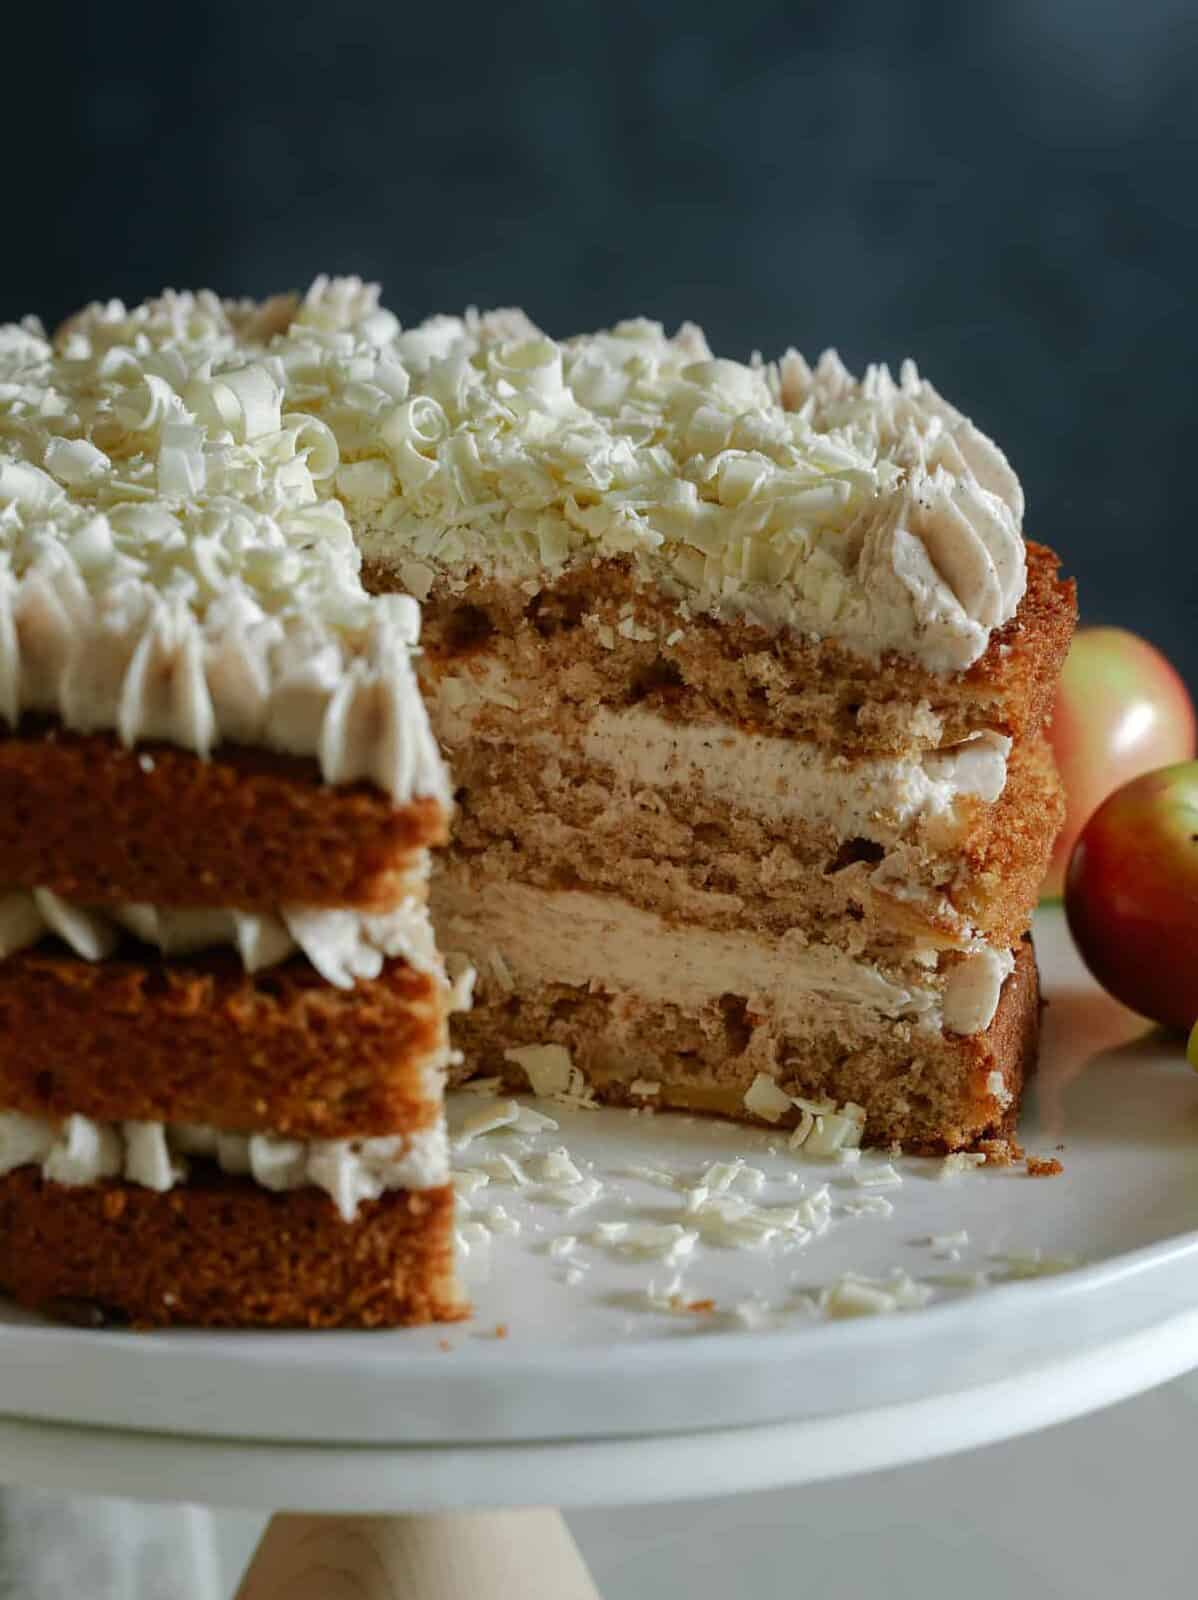 A close up of an apple cake with chai buttercream frosting with visible interior layers.